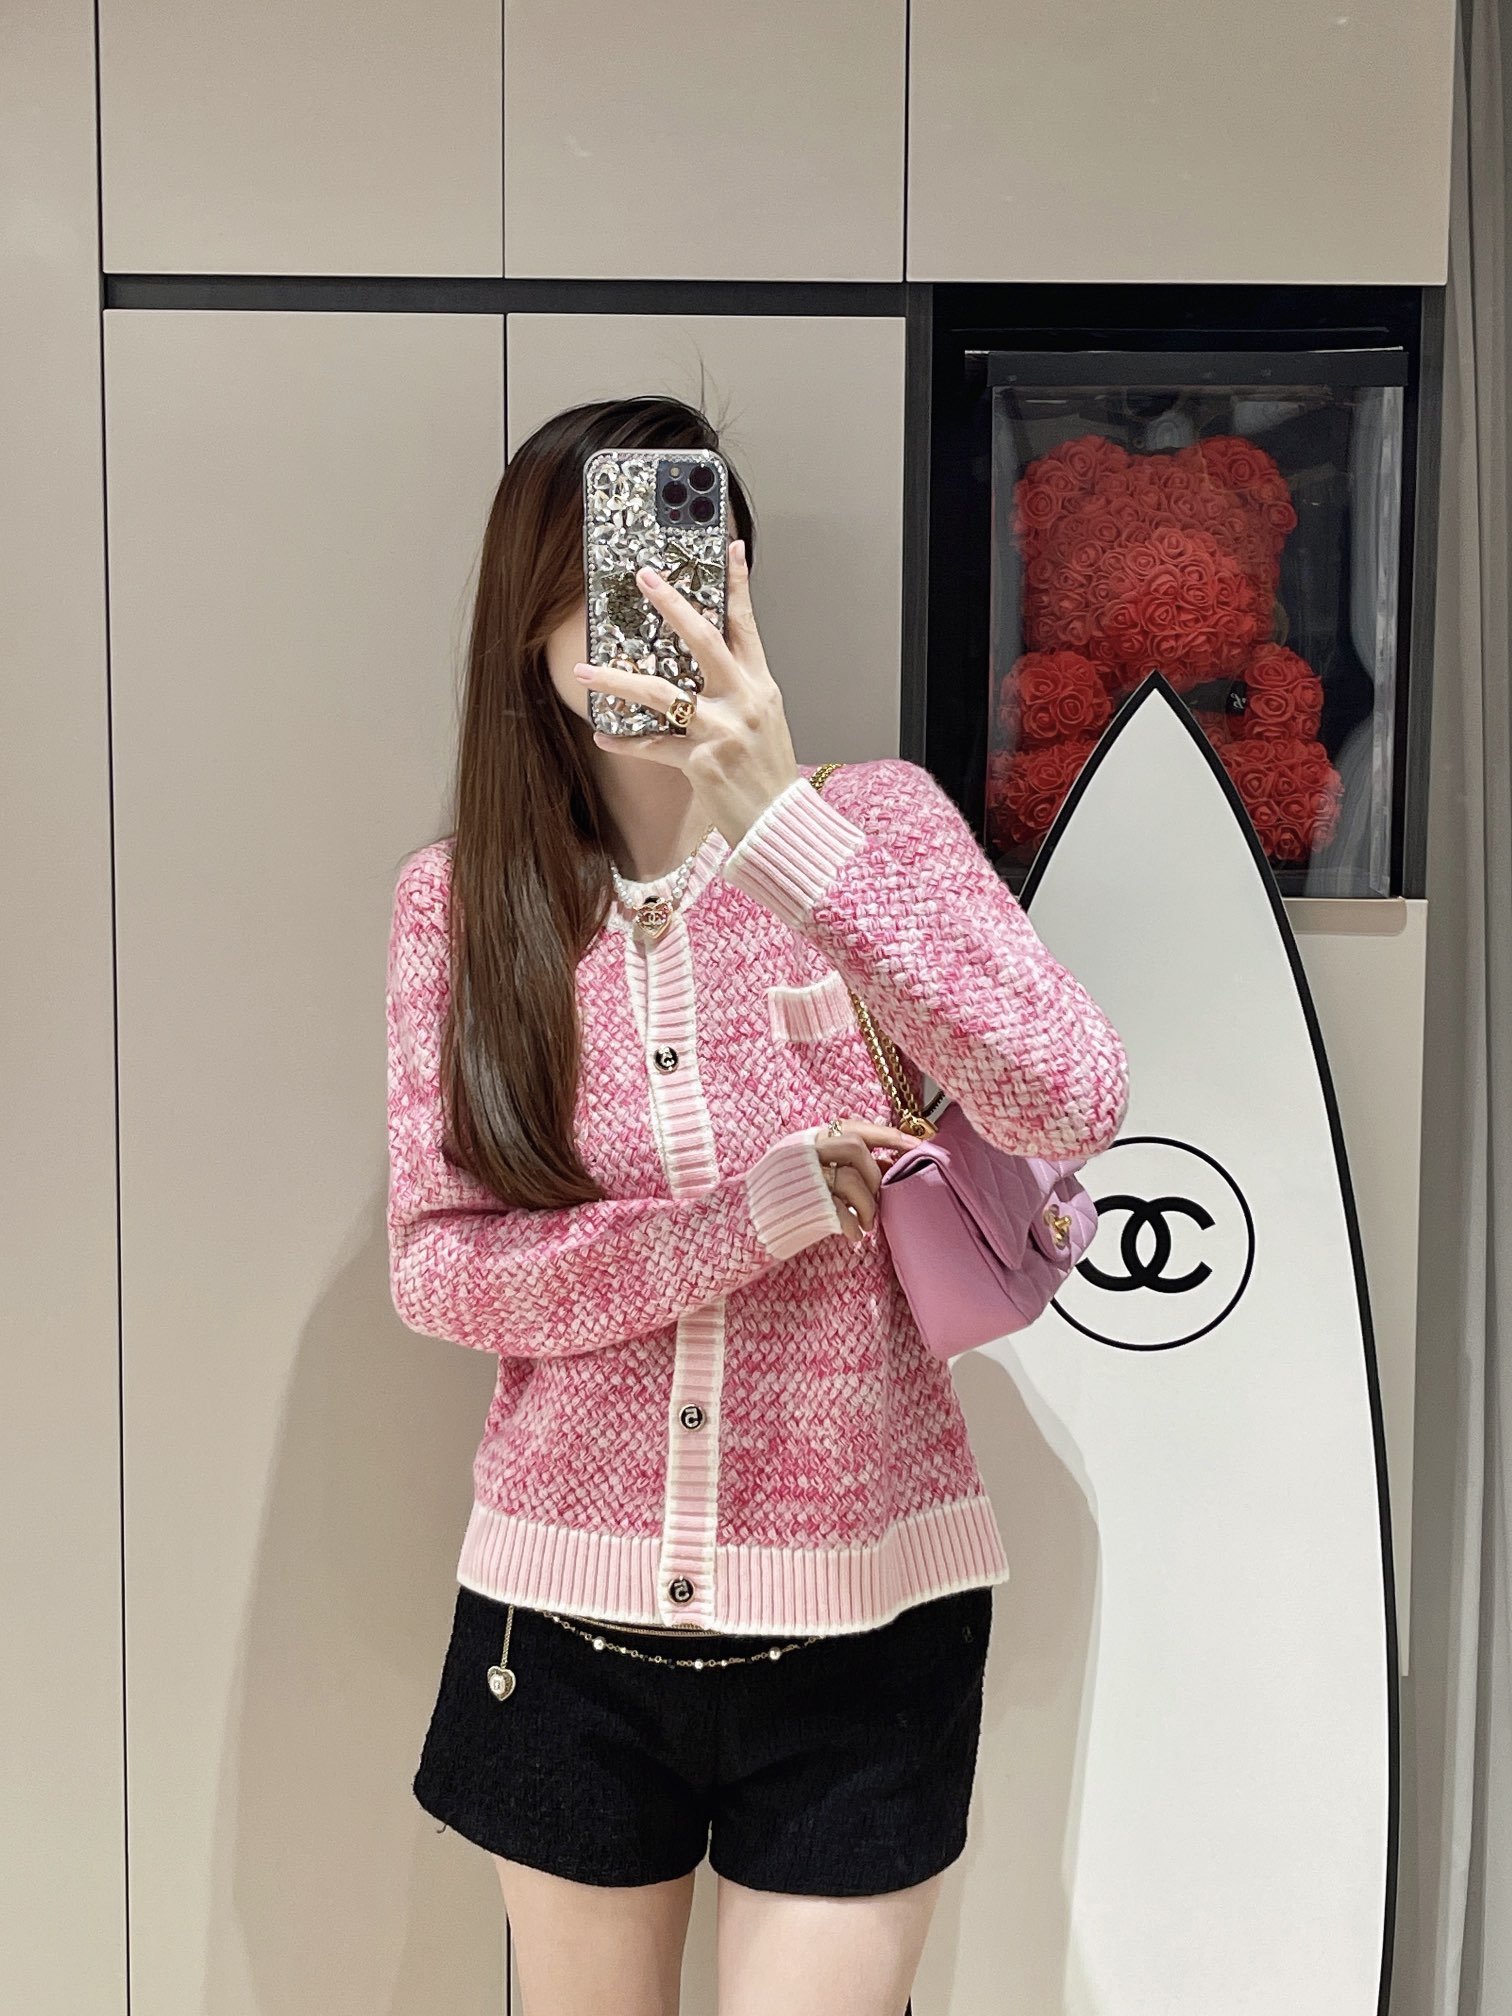 Chanel Clothing Cardigans Knit Sweater Pink Knitting Wool Fall/Winter Collection